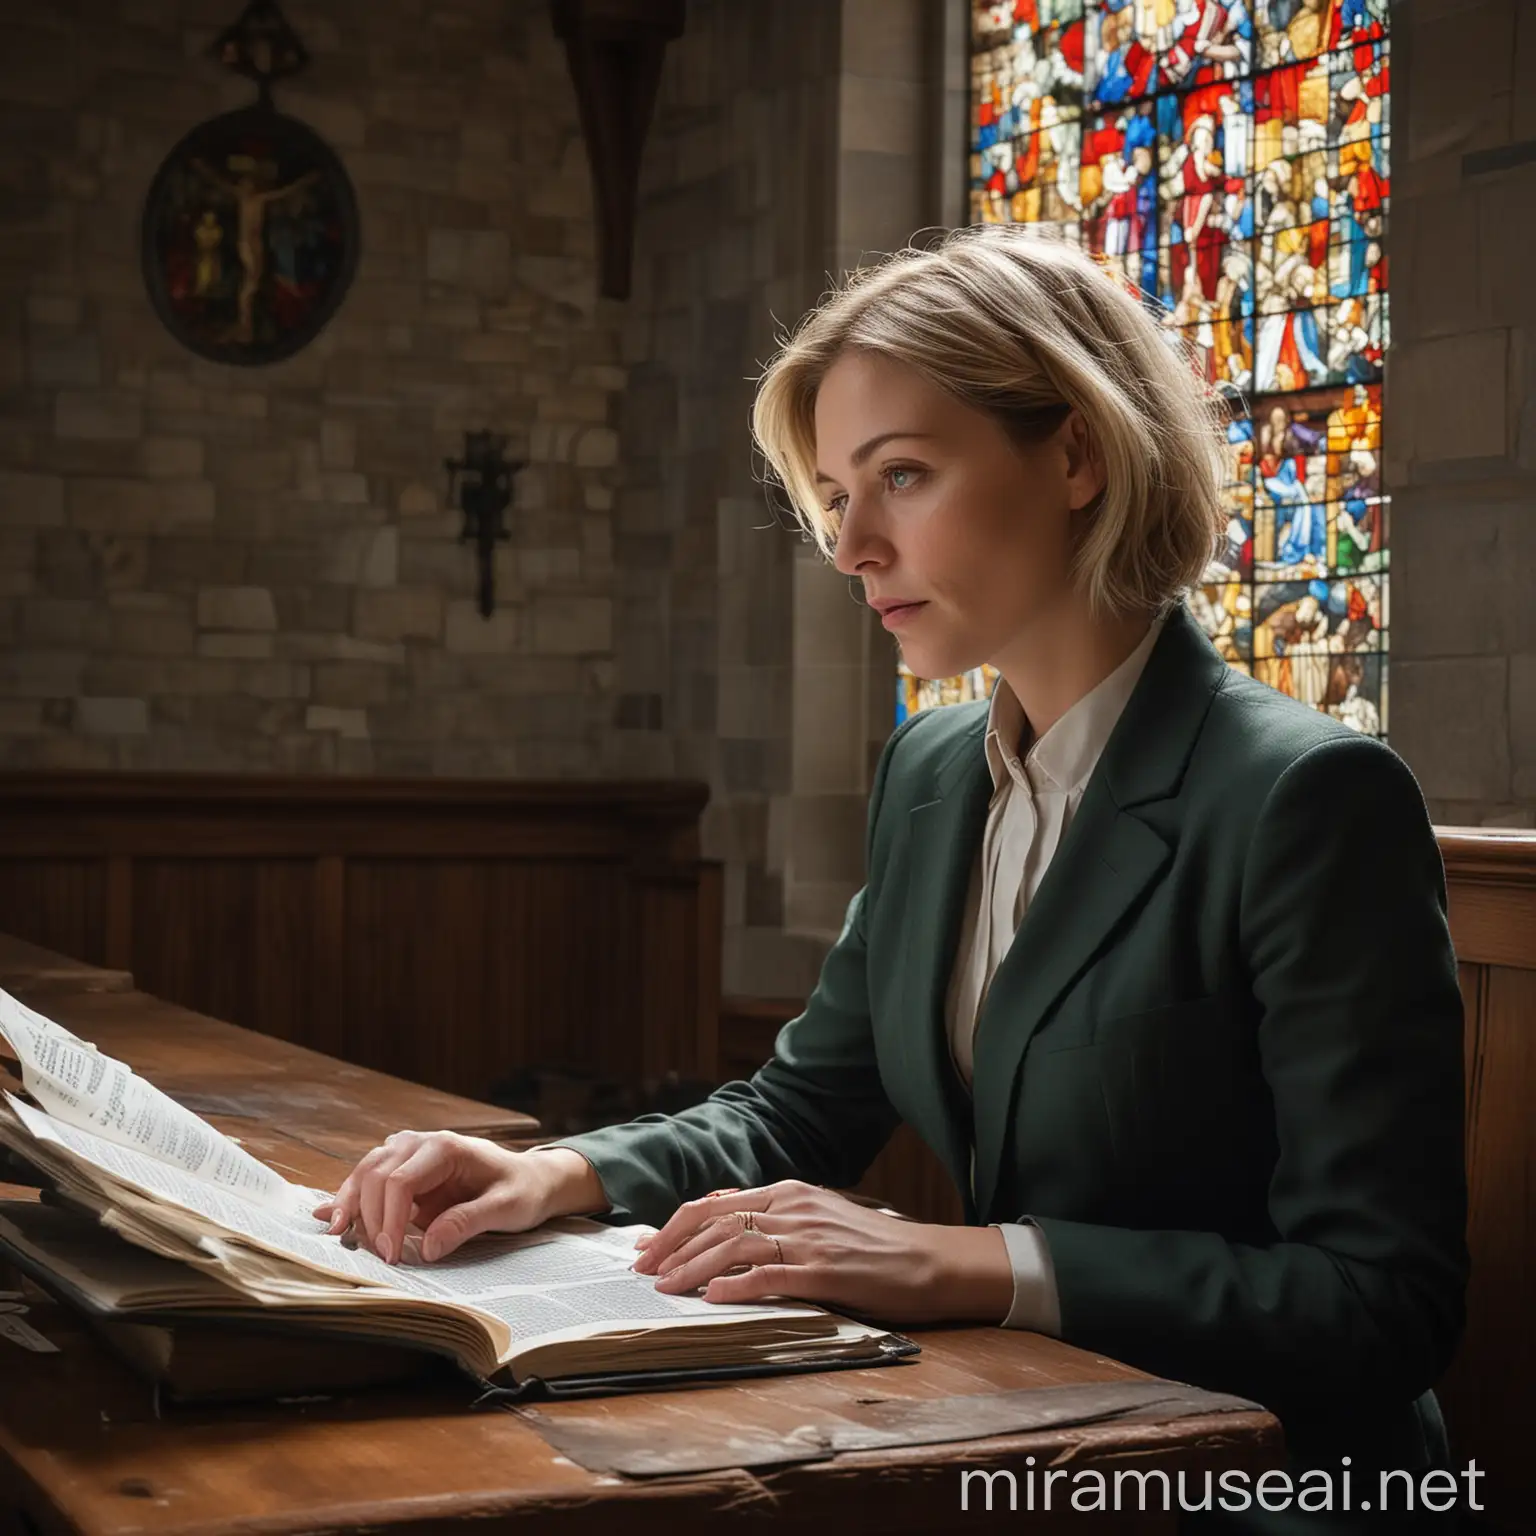 Professional Woman in Gray Suit Resting in Church Office Amidst Stained Glass Glow